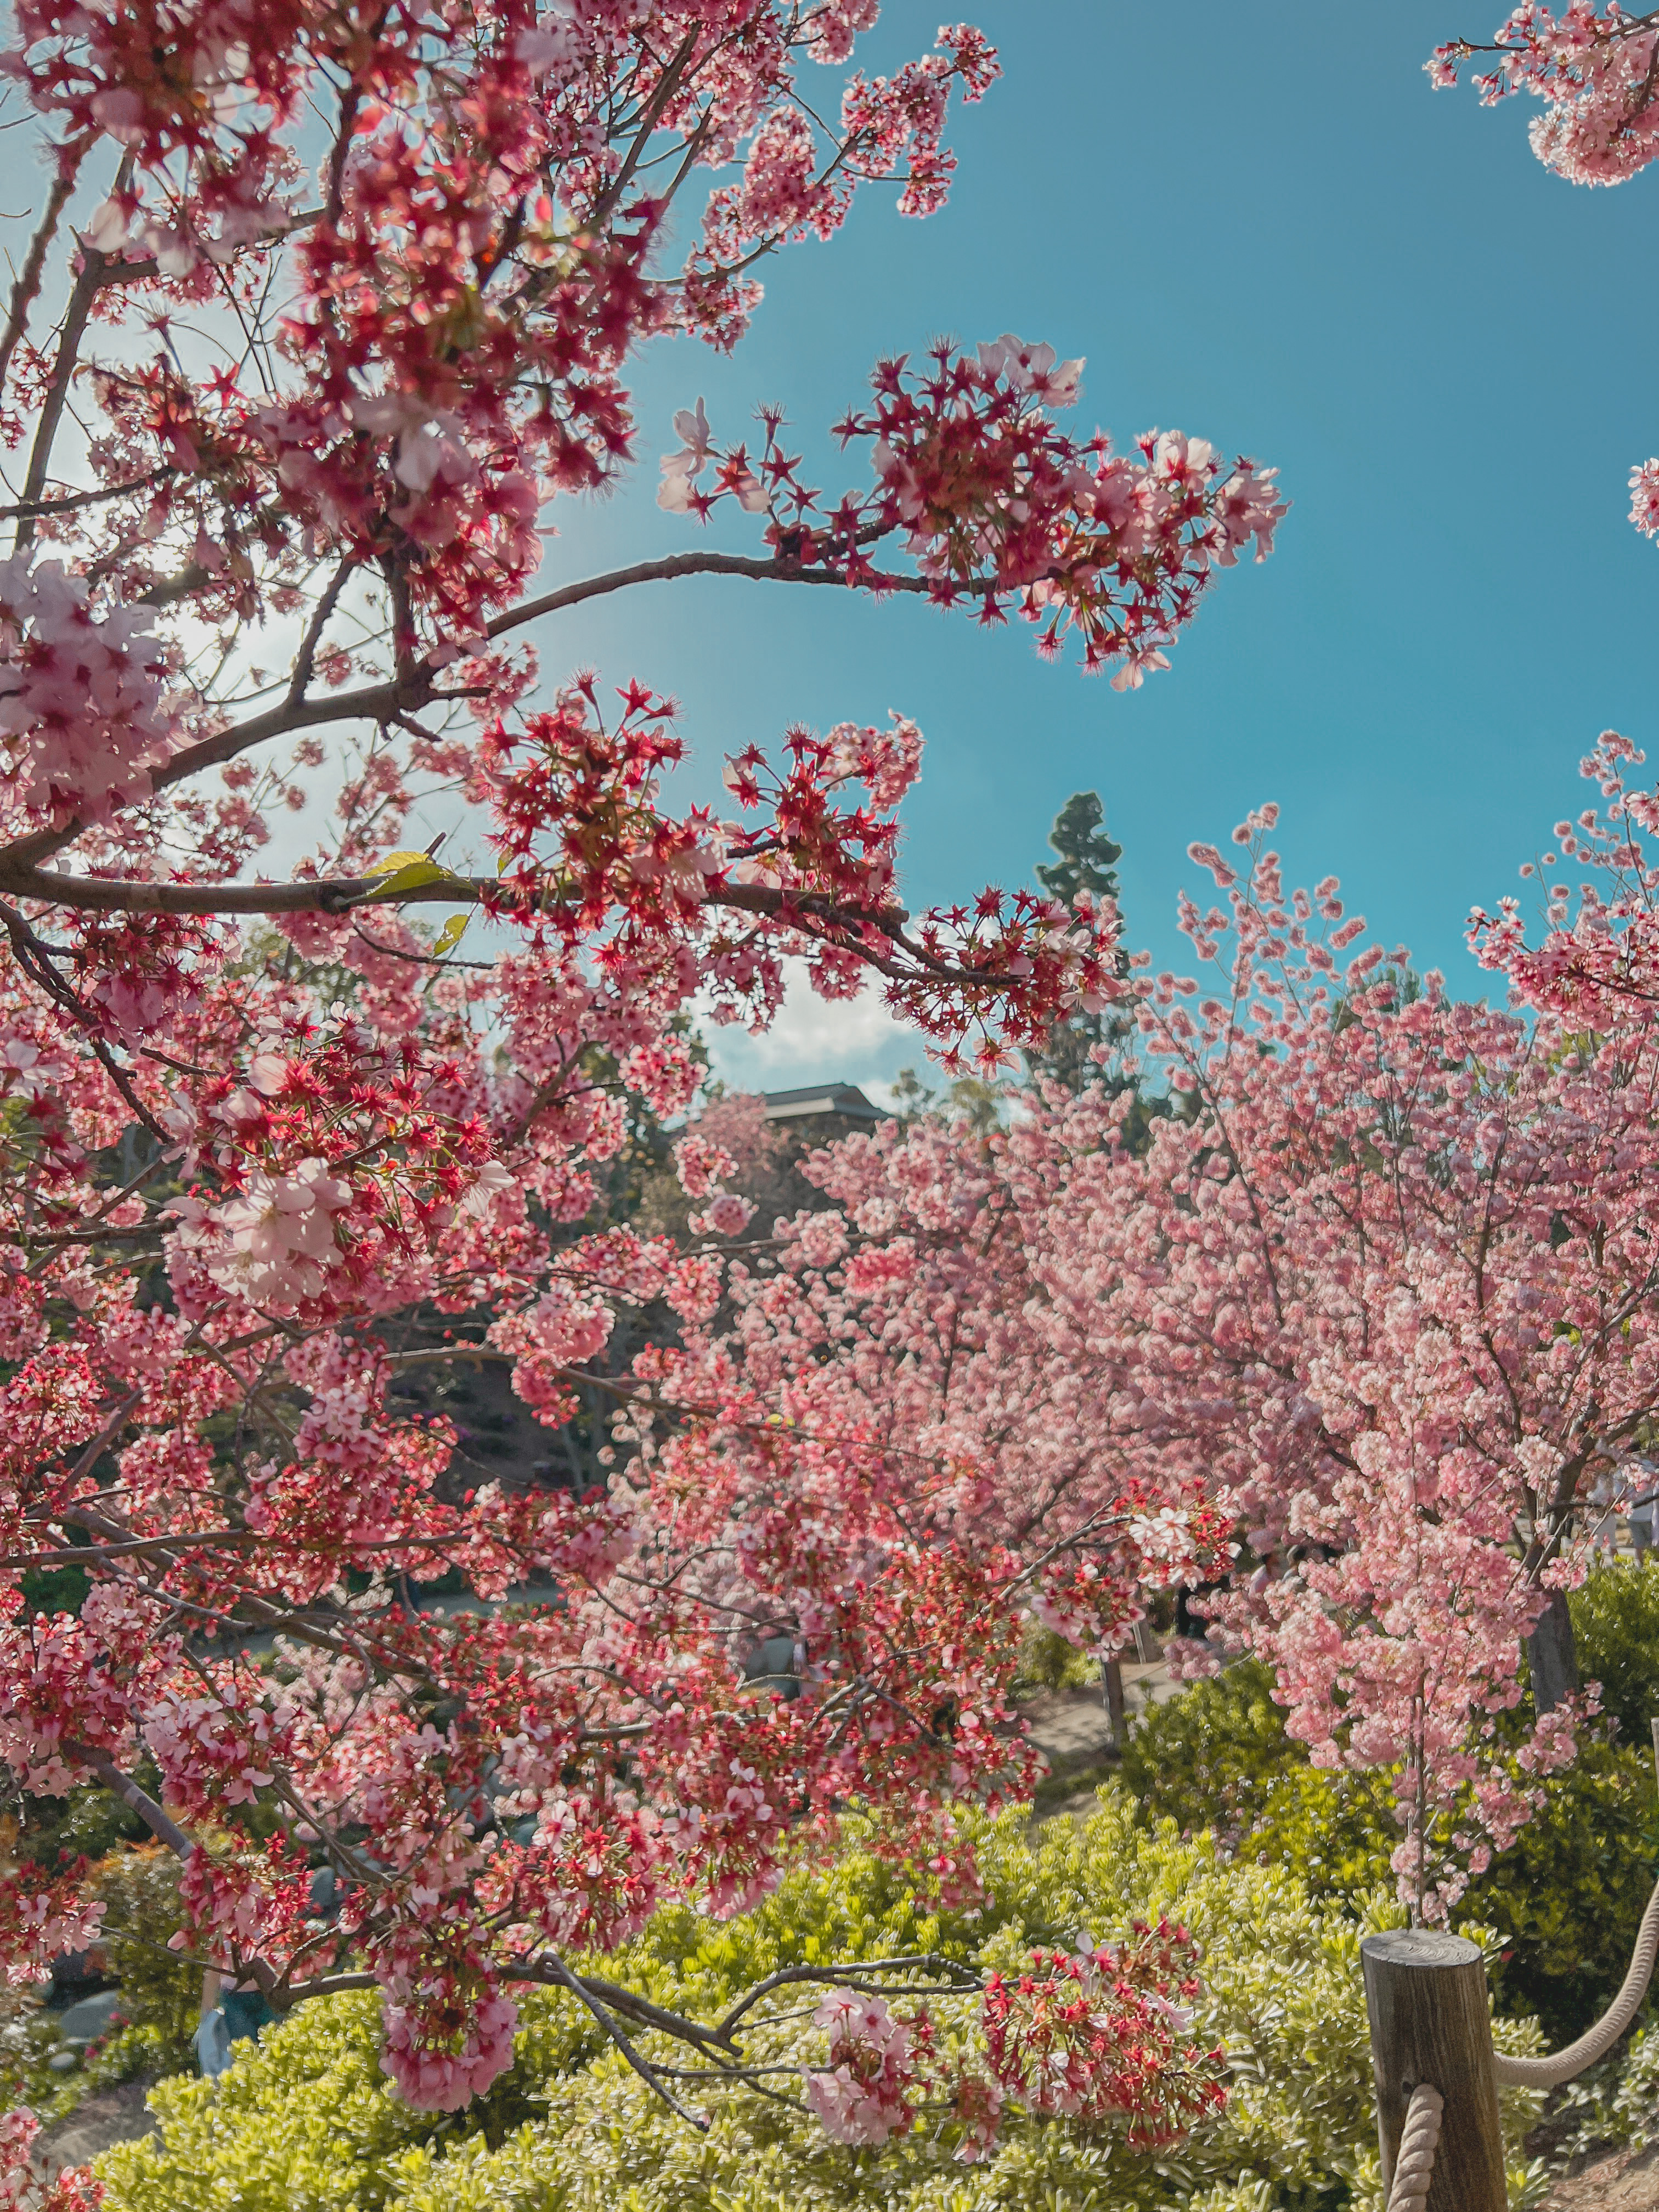 San Diego Cherry Blossoms: What you need to know for visiting